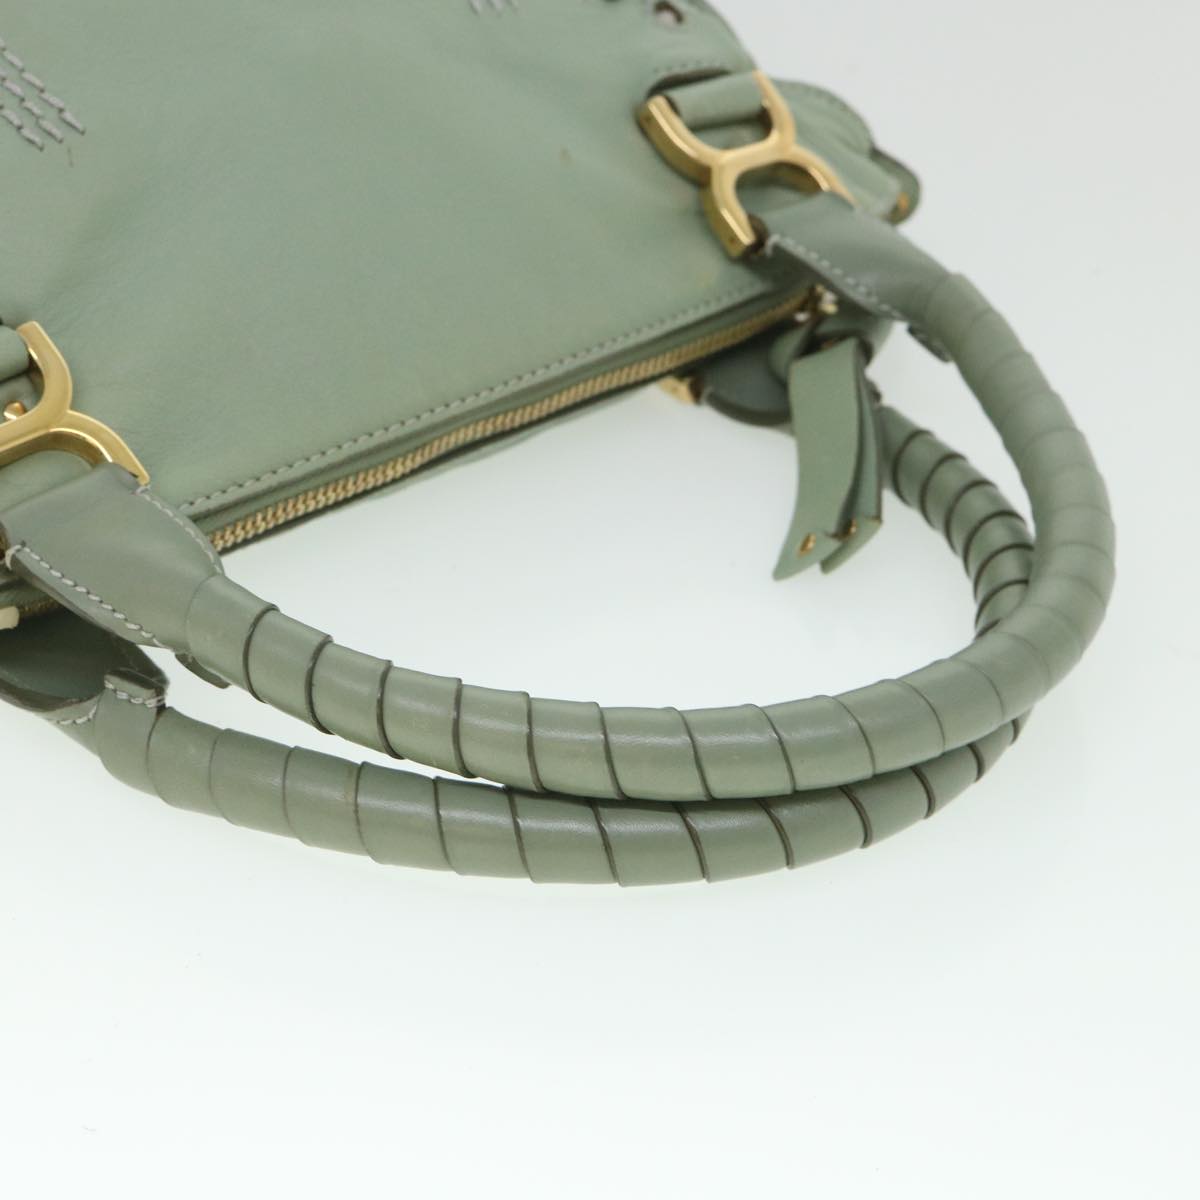 Chloe Mercy Shoulder Bag Leather 2way Green Auth 56669